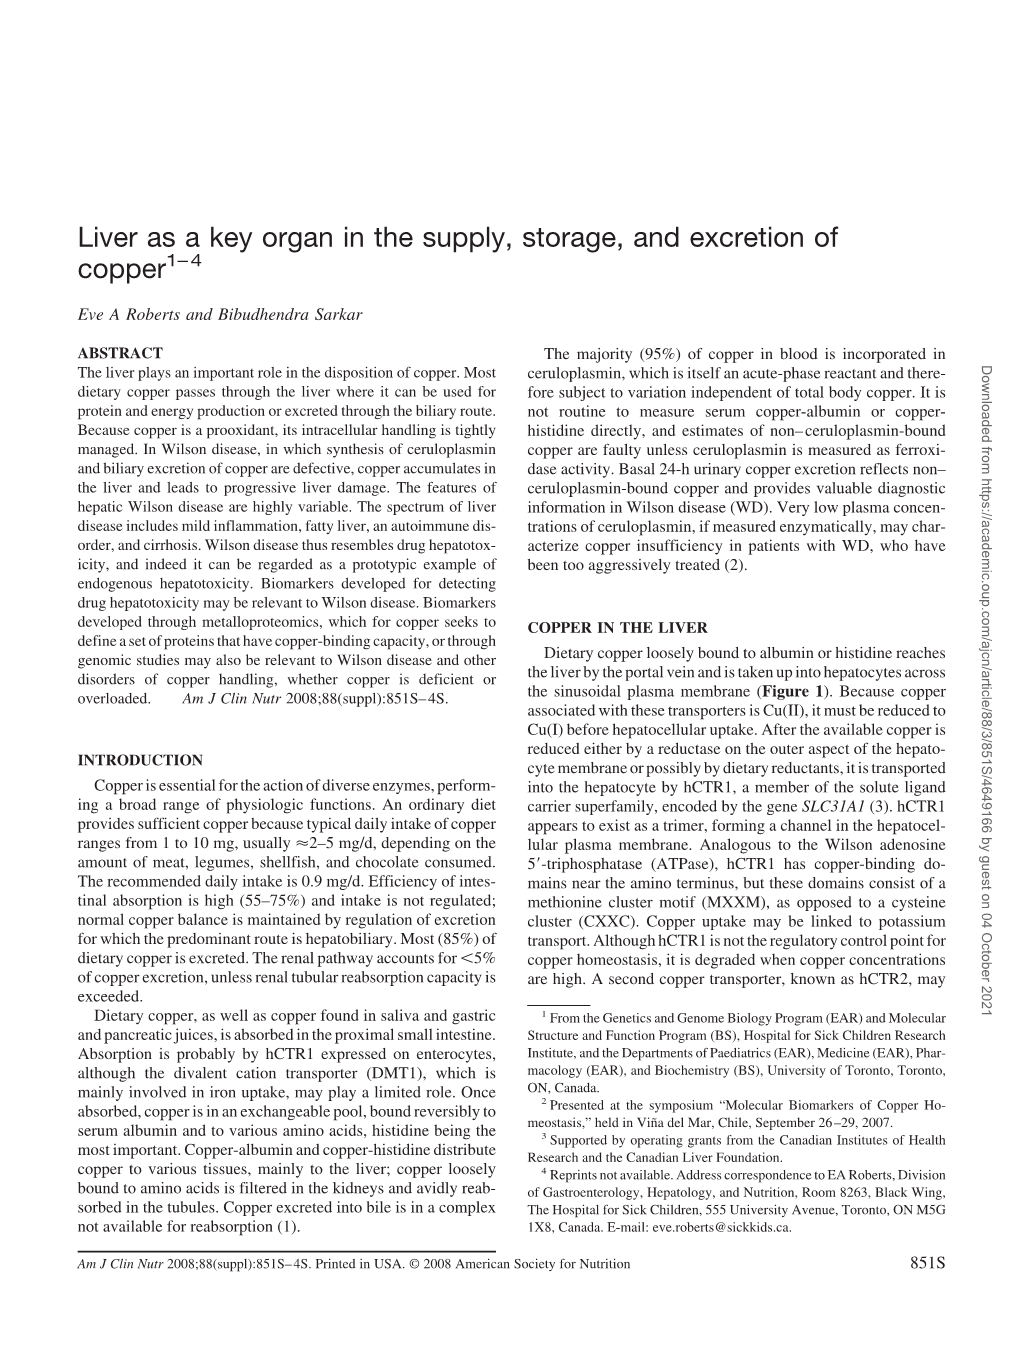 Liver As a Key Organ in the Supply, Storage, and Excretion of Copper1– 4